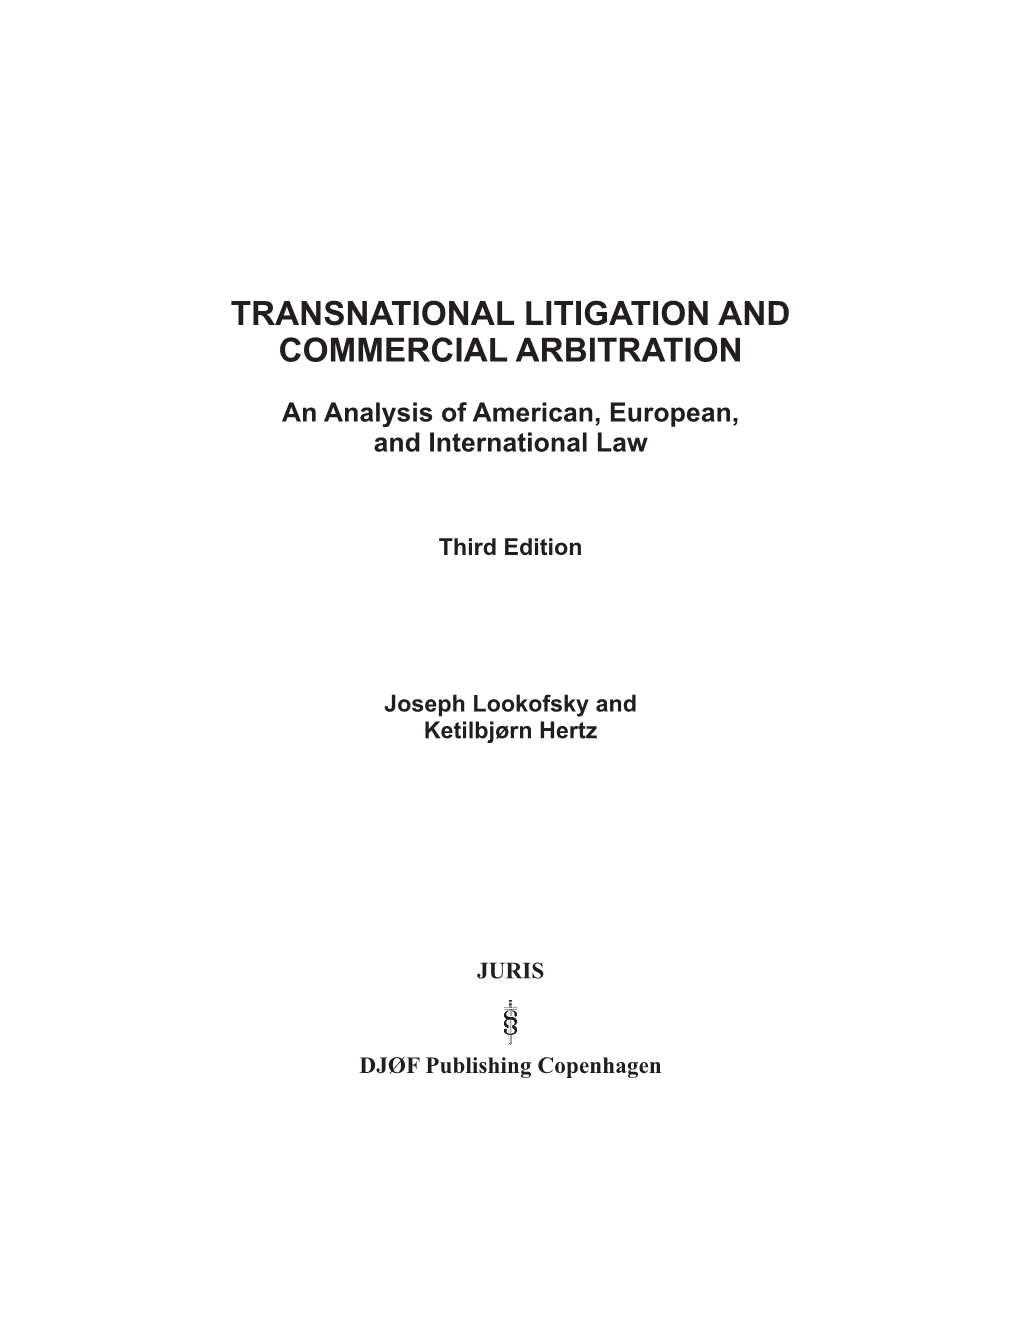 Transnational Litigation and Commercial Arbitration